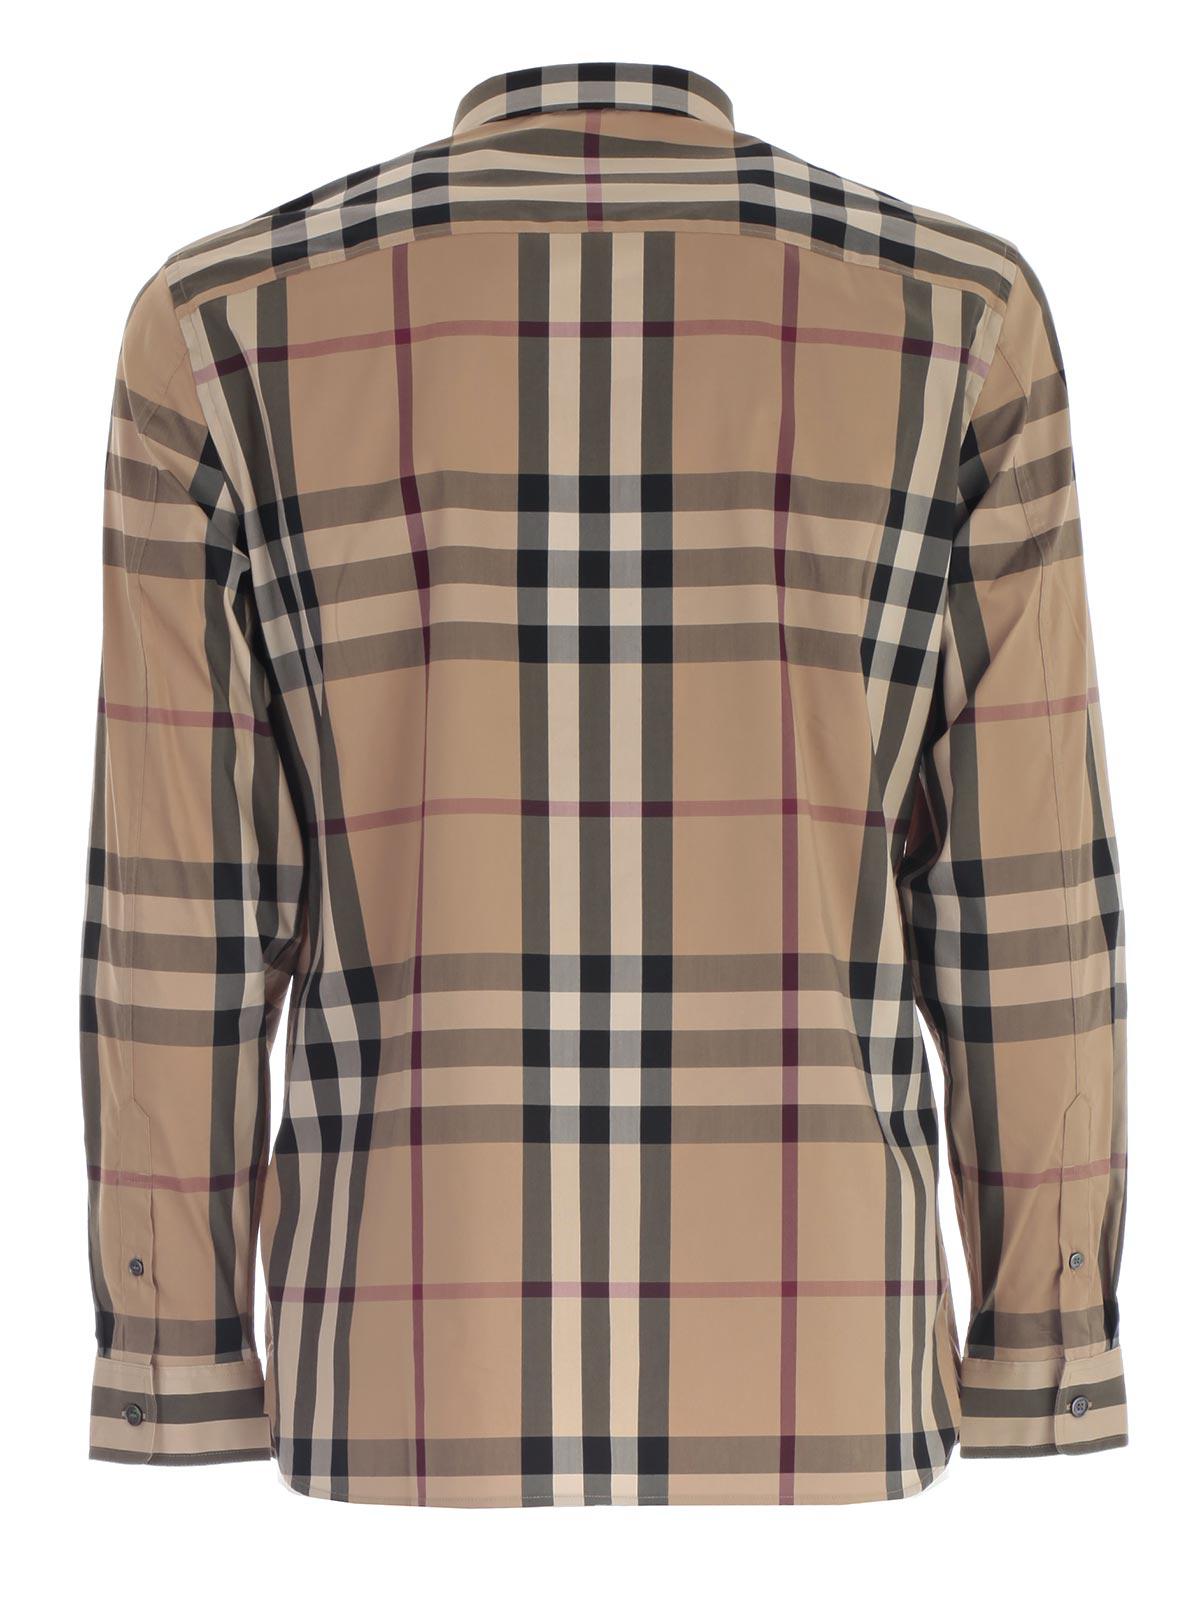 Lyst - Burberry Camicia for Men